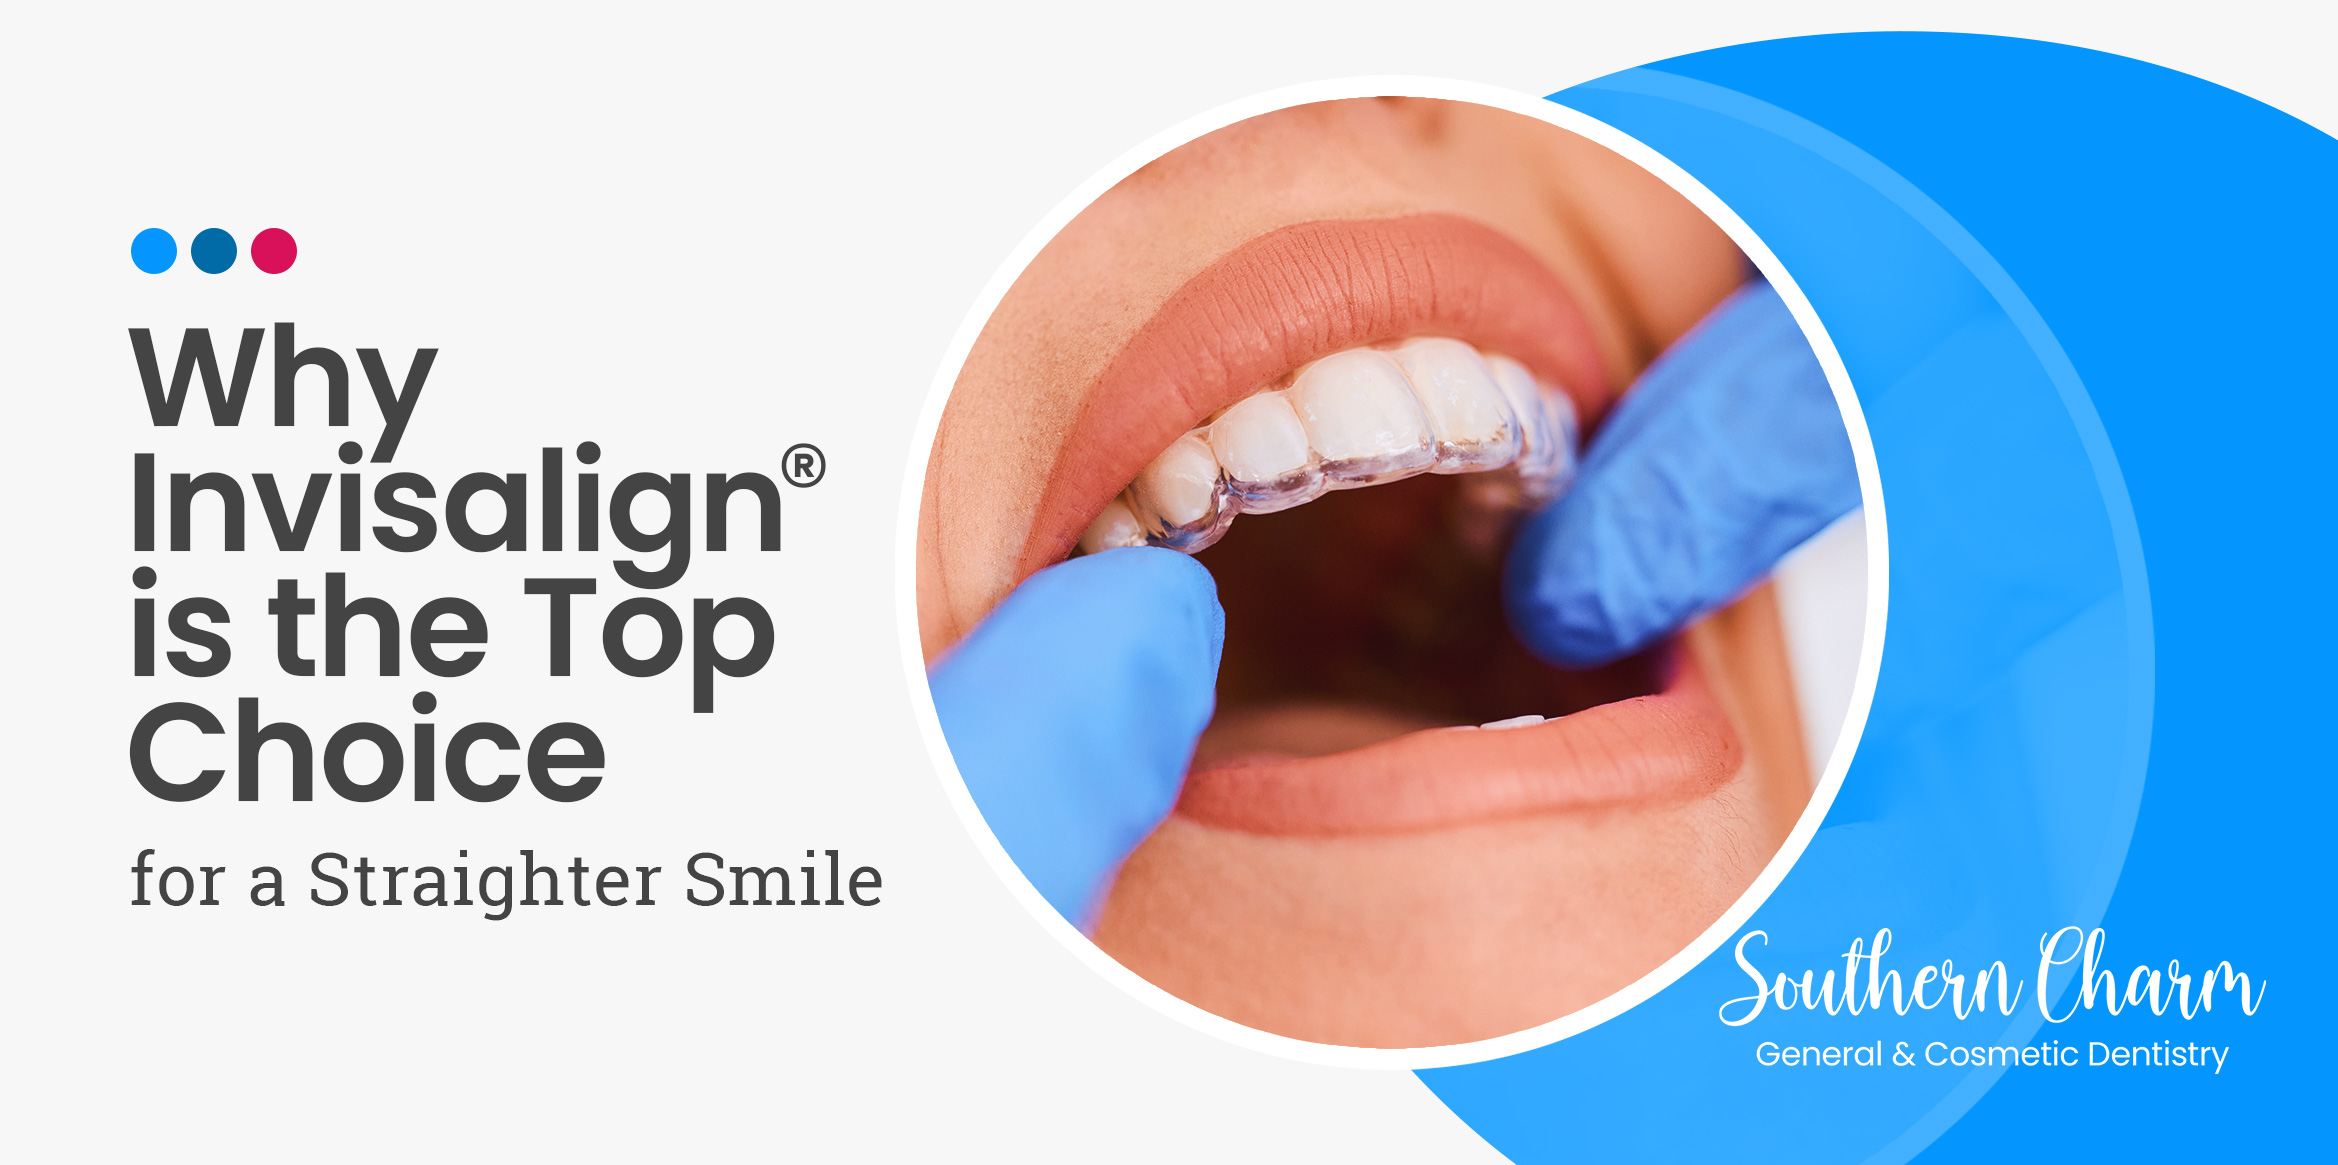 Invisalign is the top choice